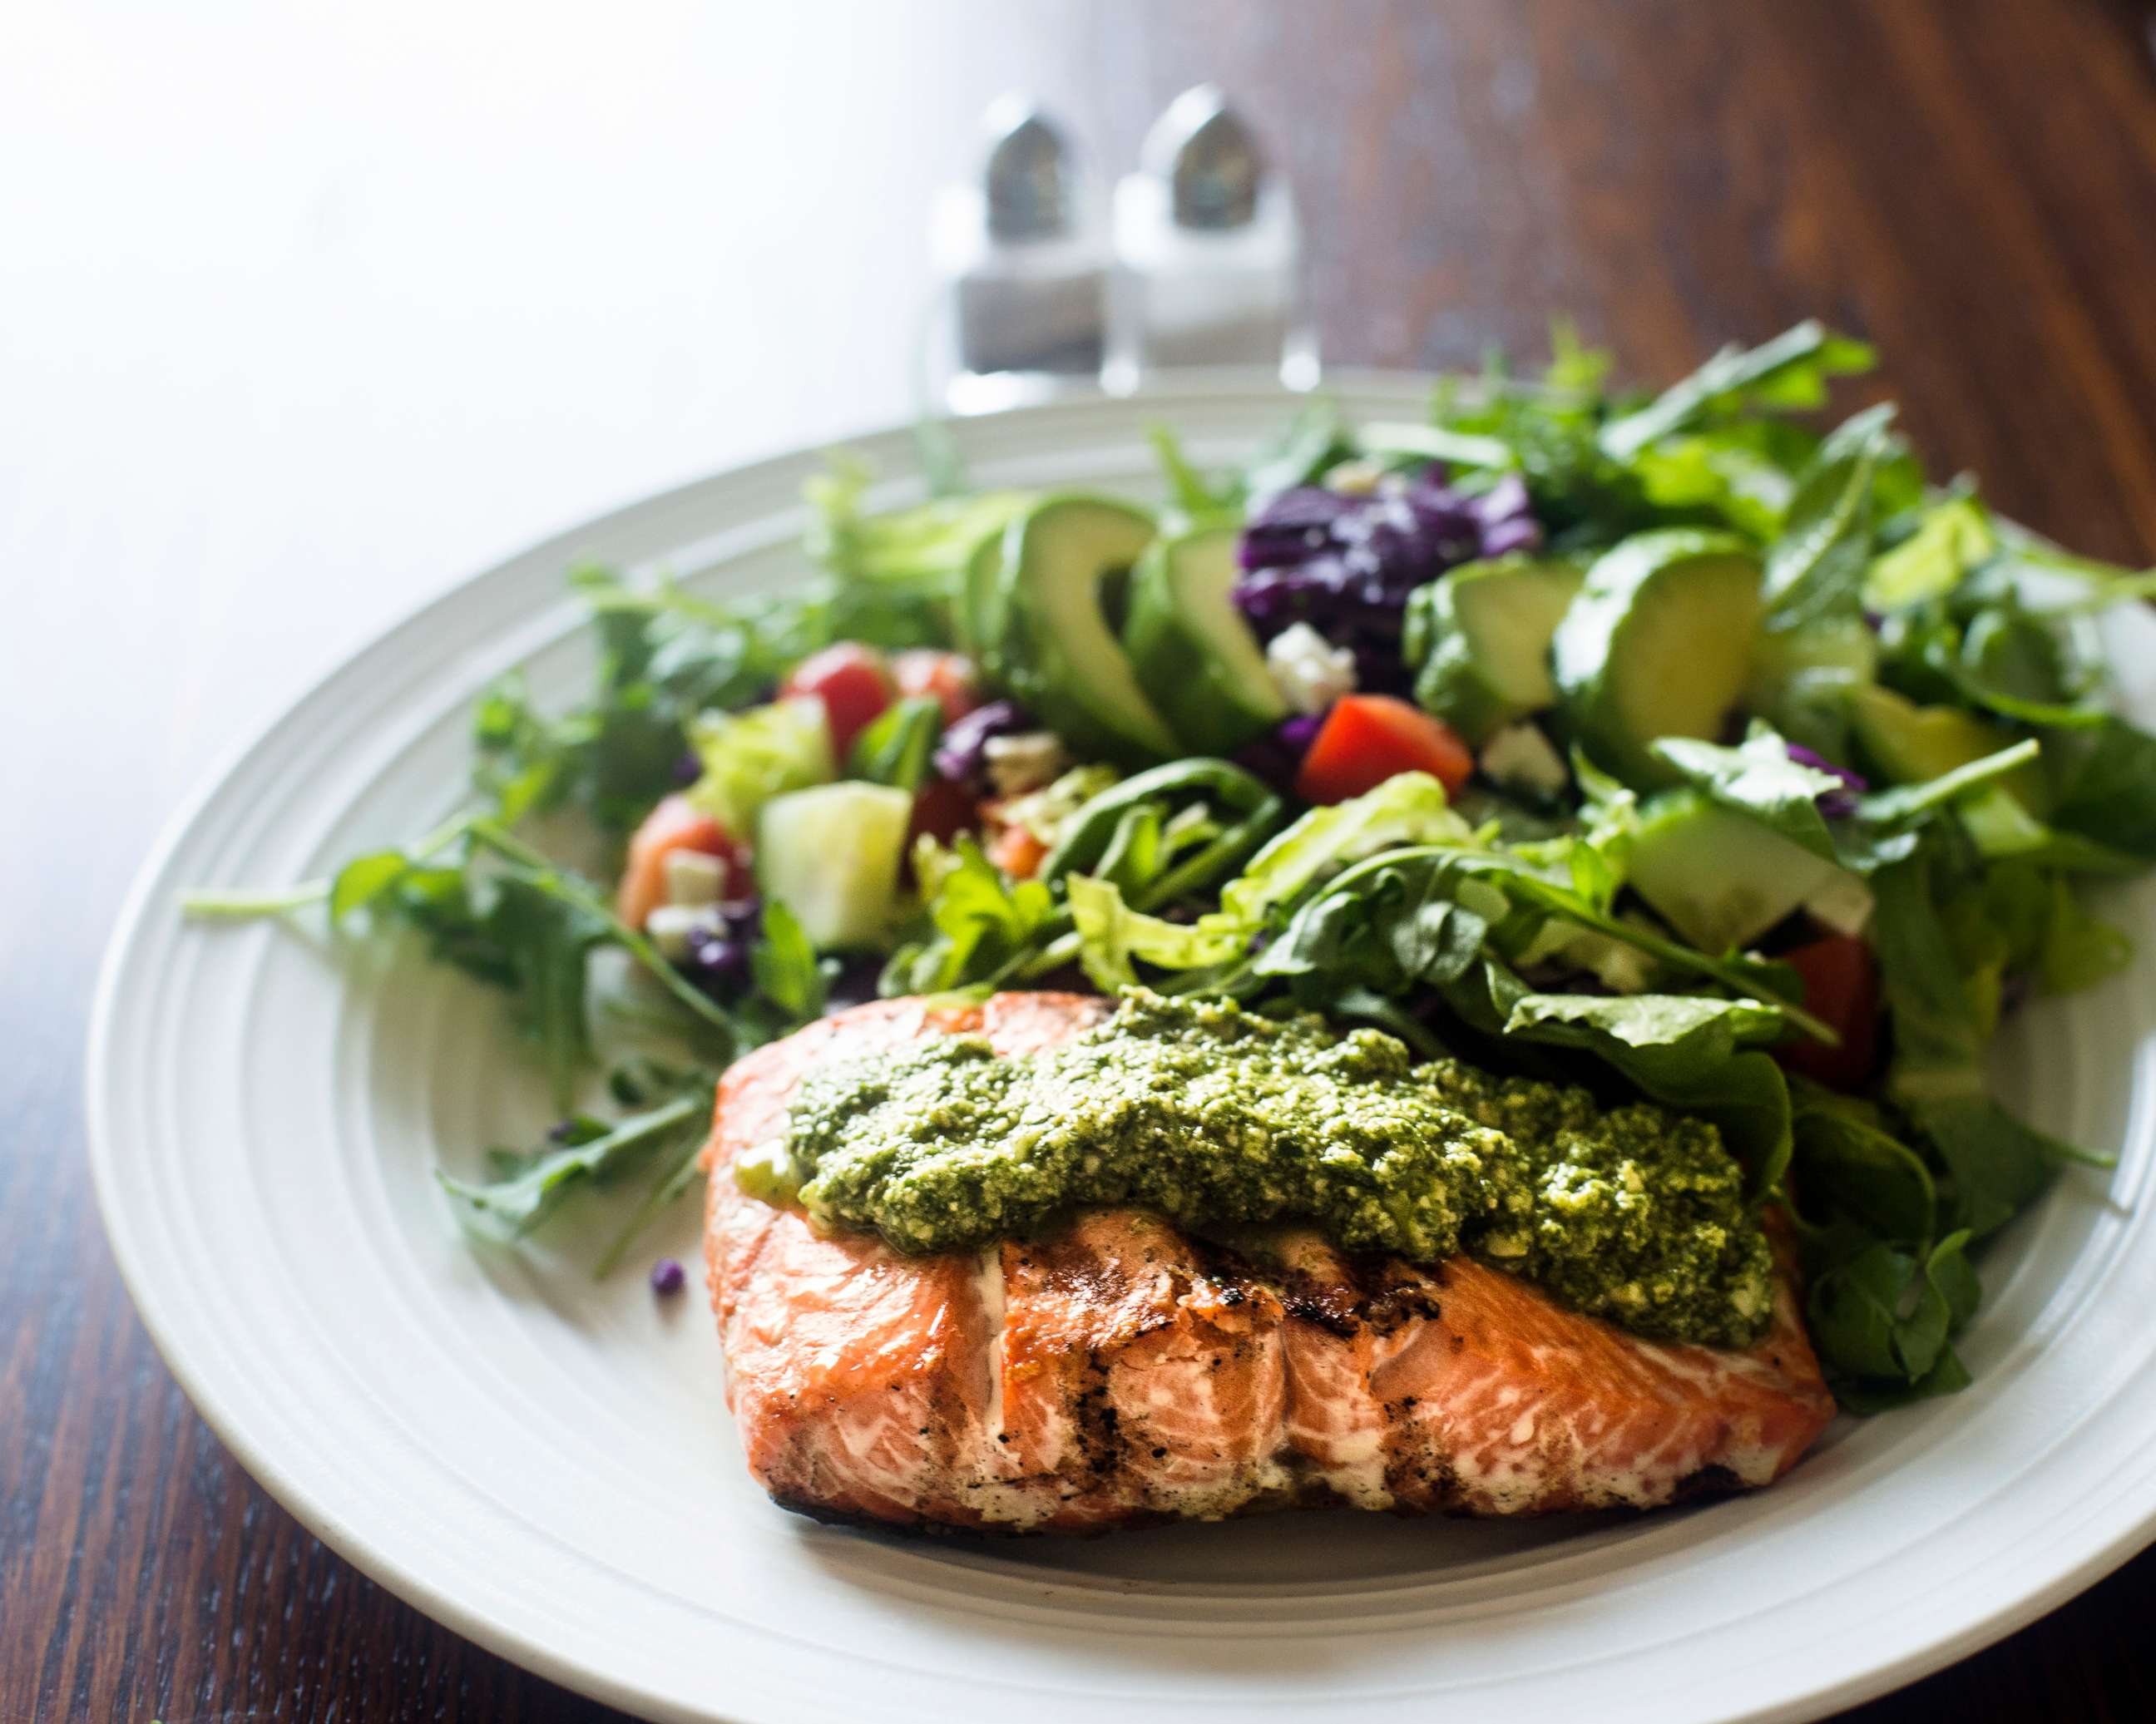 PHOTO: This stock photo depicts a filet of salmon with pesto and a side salad.